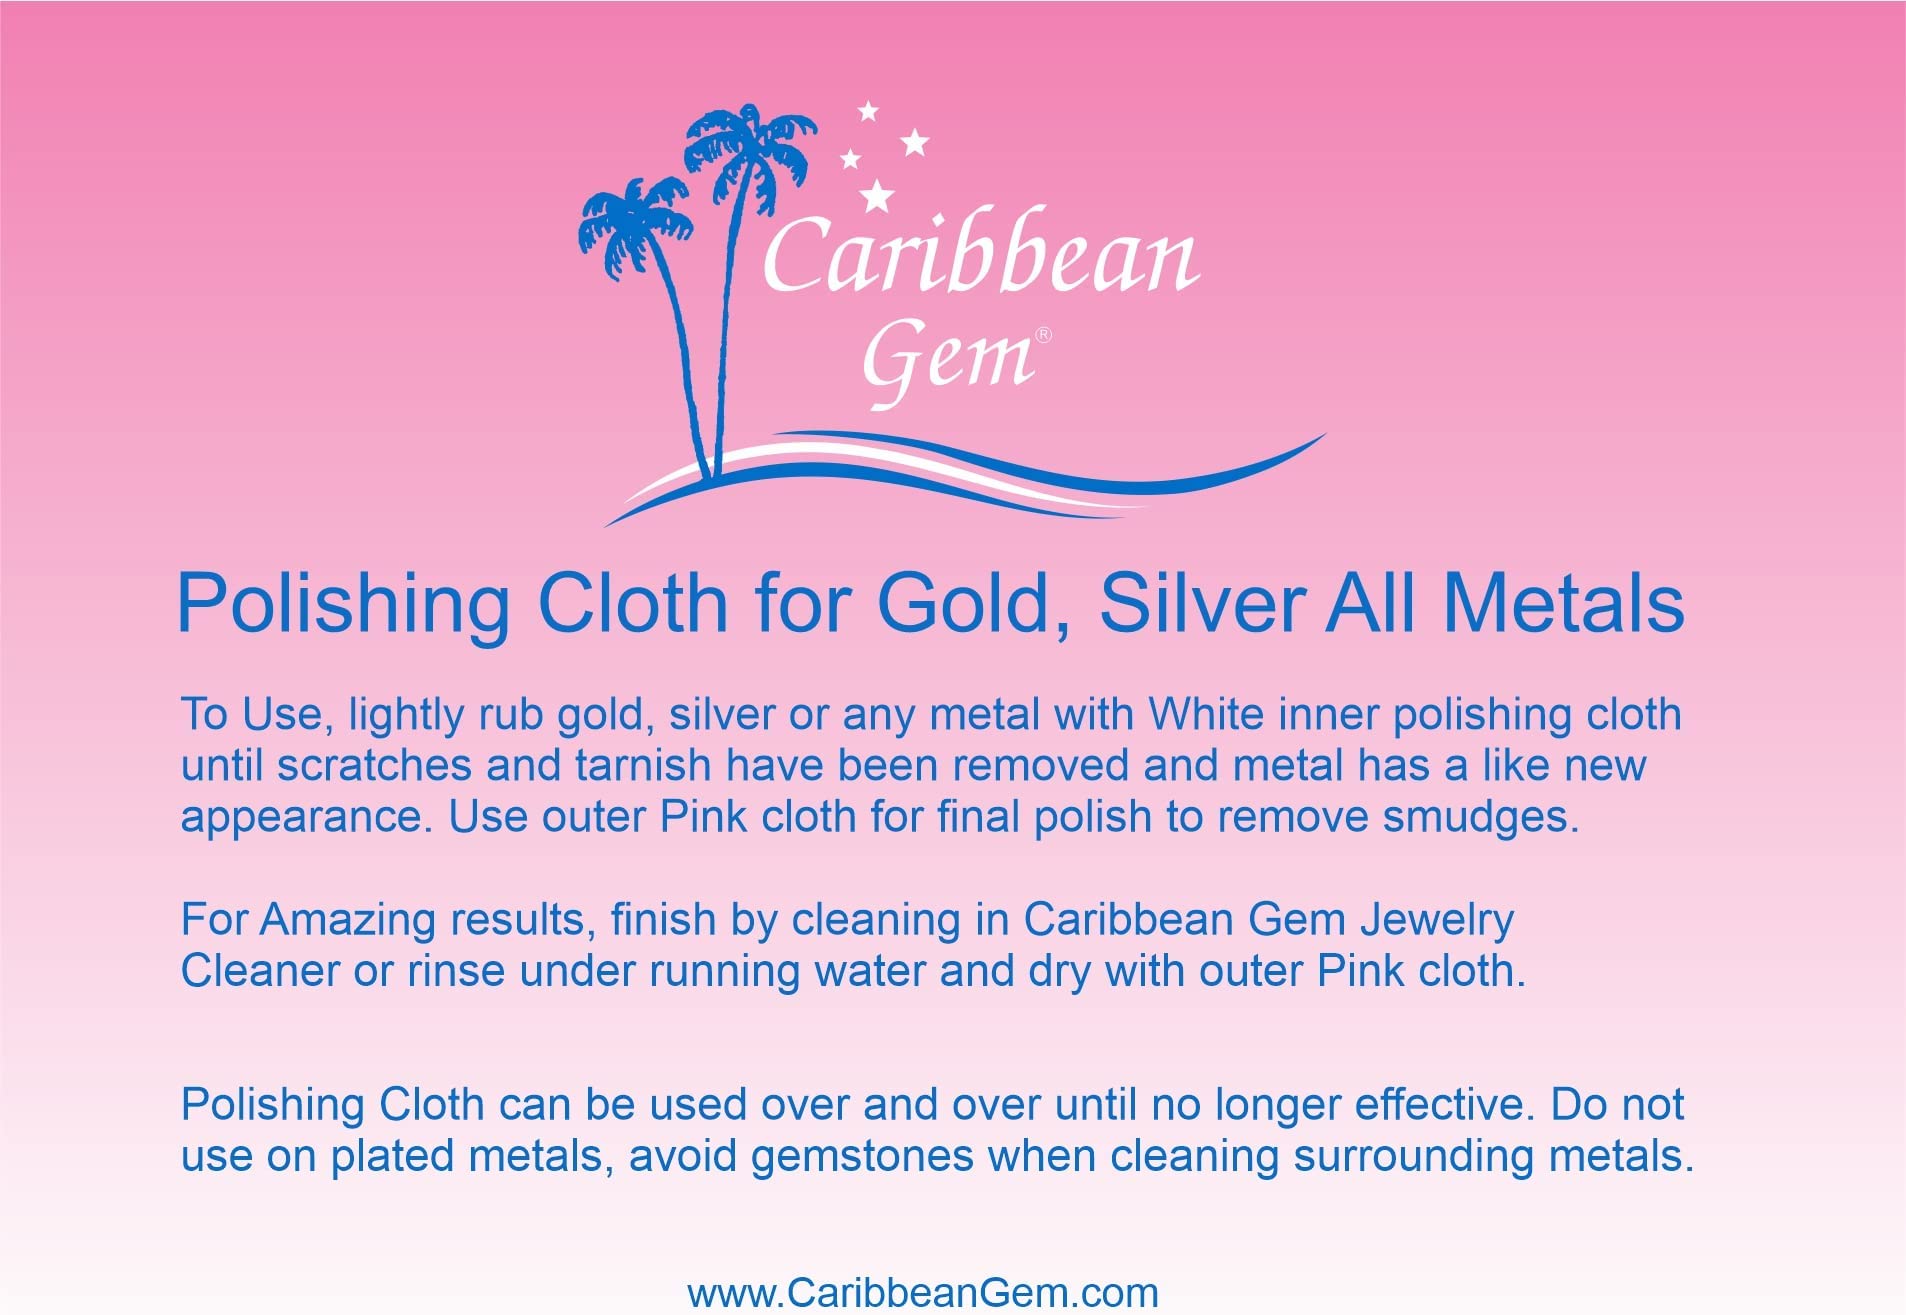 Caribbean Gem Jewelry Cleaner - All About Metals Kit Polish Silver, Gold,  Platinum & More